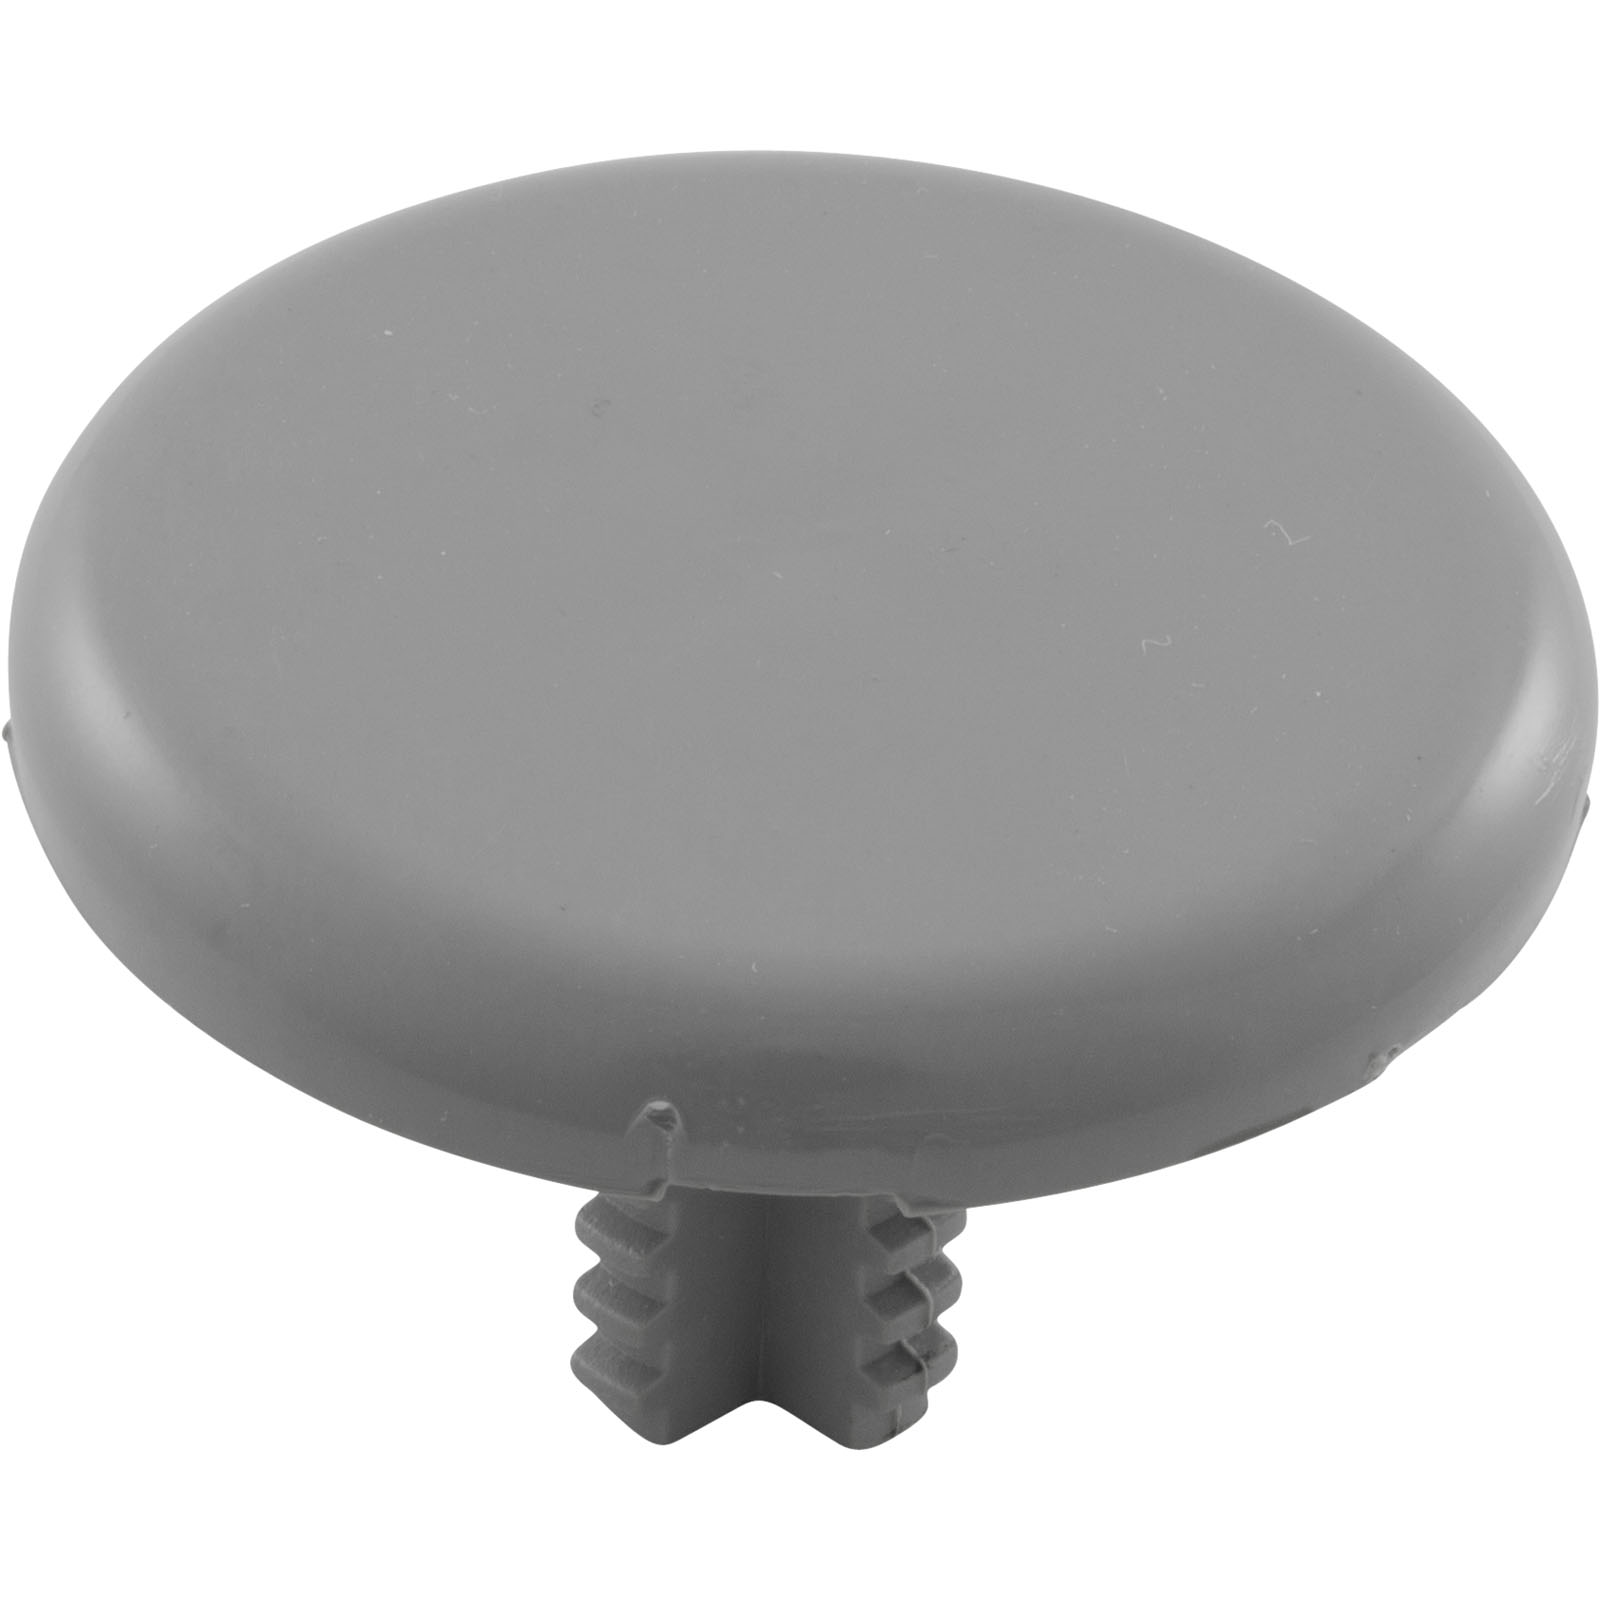 AIR INJECTOR CAP, WW, LOW PROFILE, 1-3/4